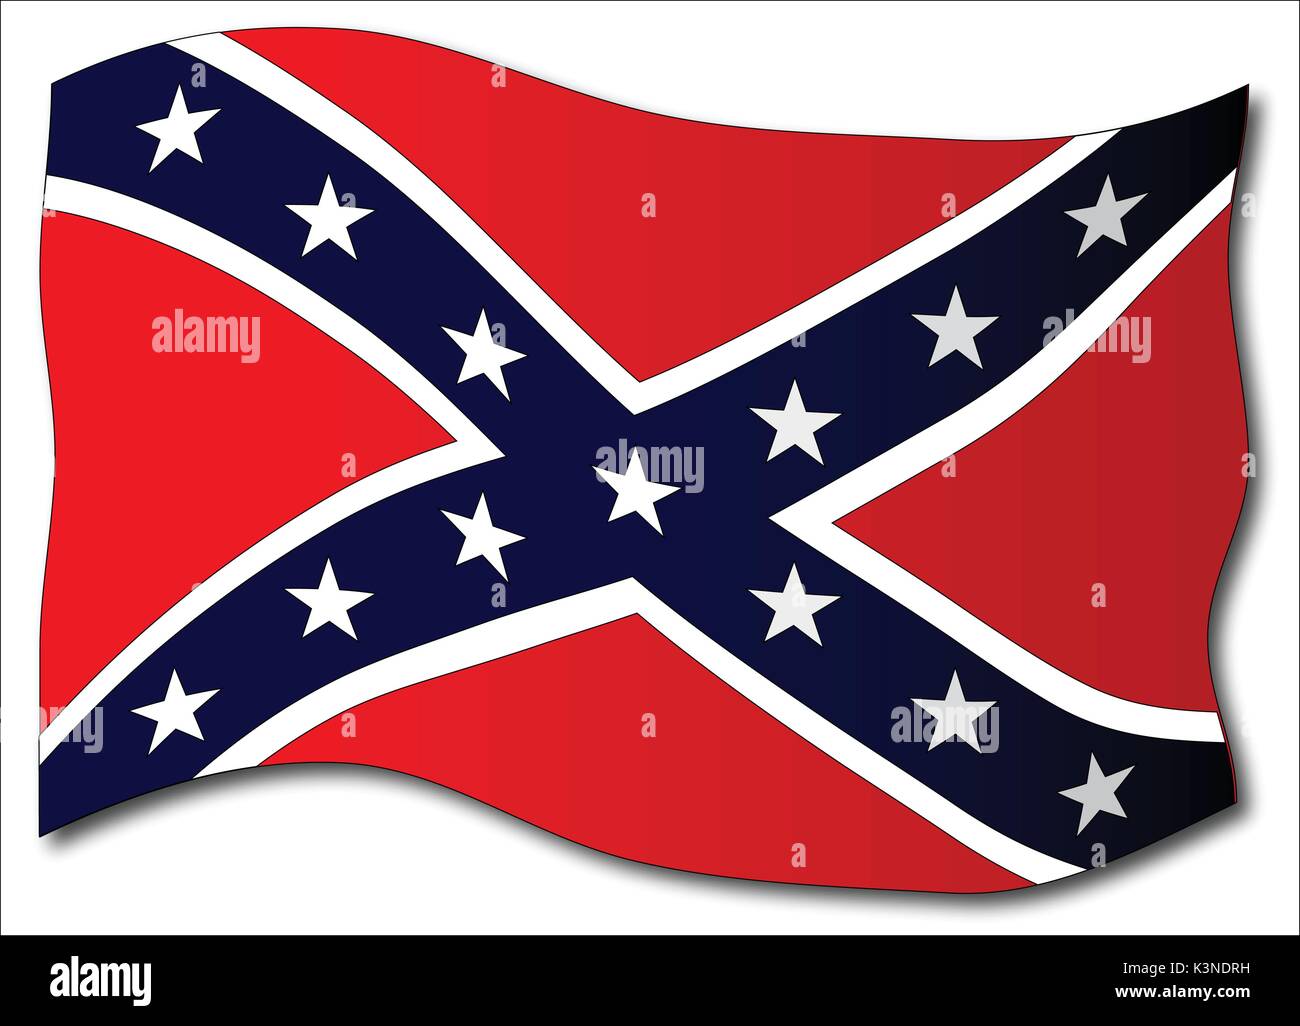 The flag of the confederates during the American Civil War on a white background Stock Vector